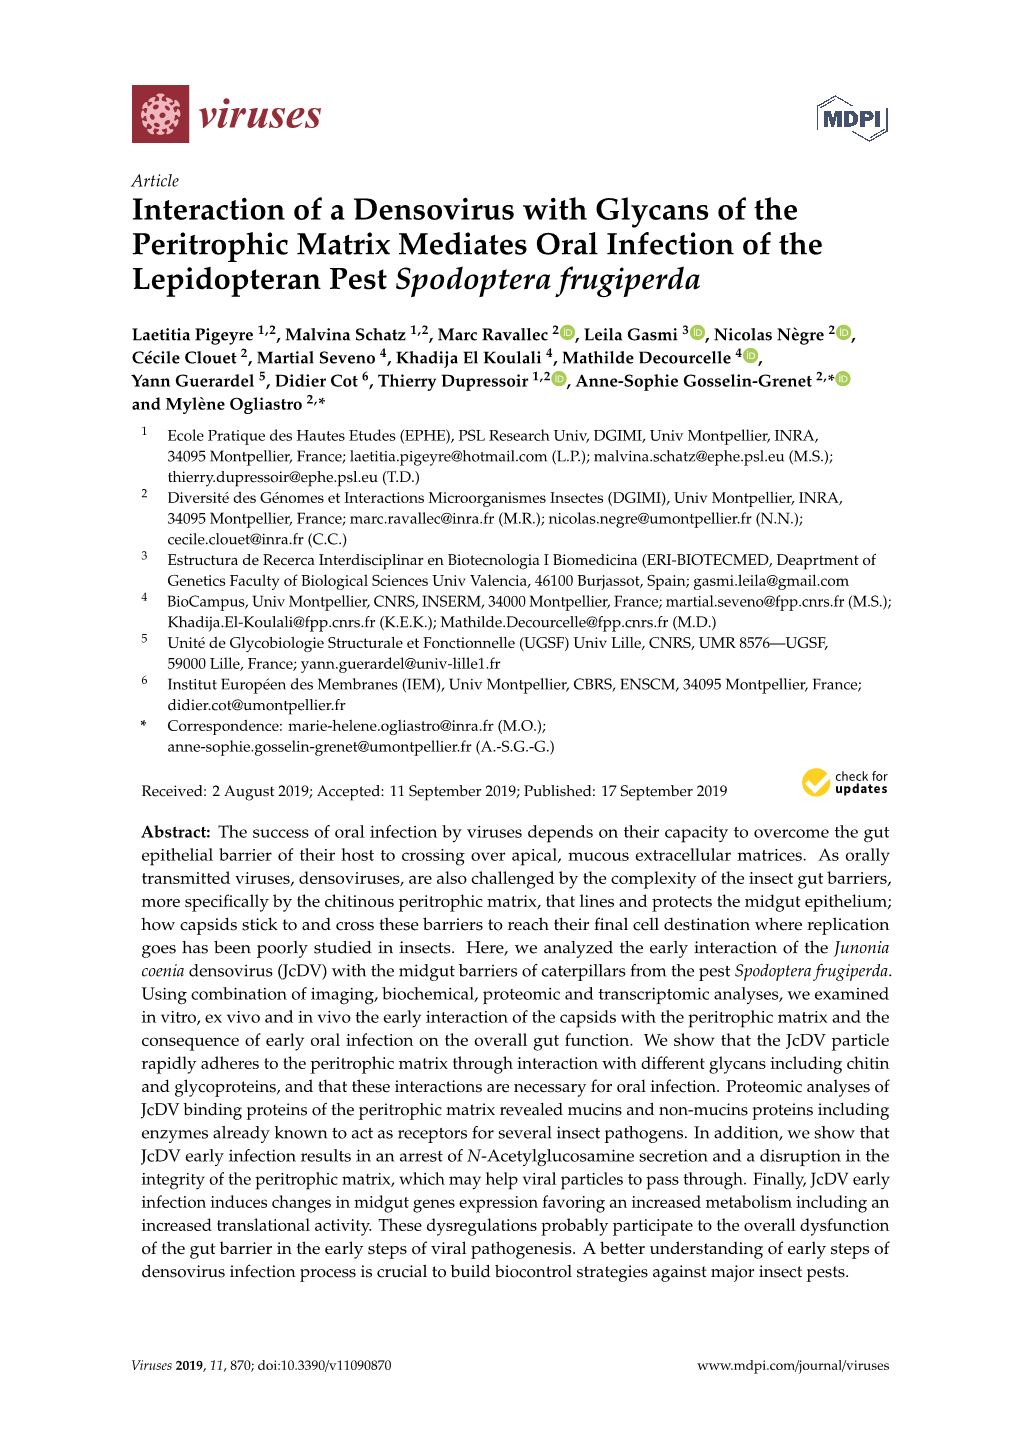 Interaction of a Densovirus with Glycans of the Peritrophic Matrix Mediates Oral Infection of the Lepidopteran Pest Spodoptera Frugiperda